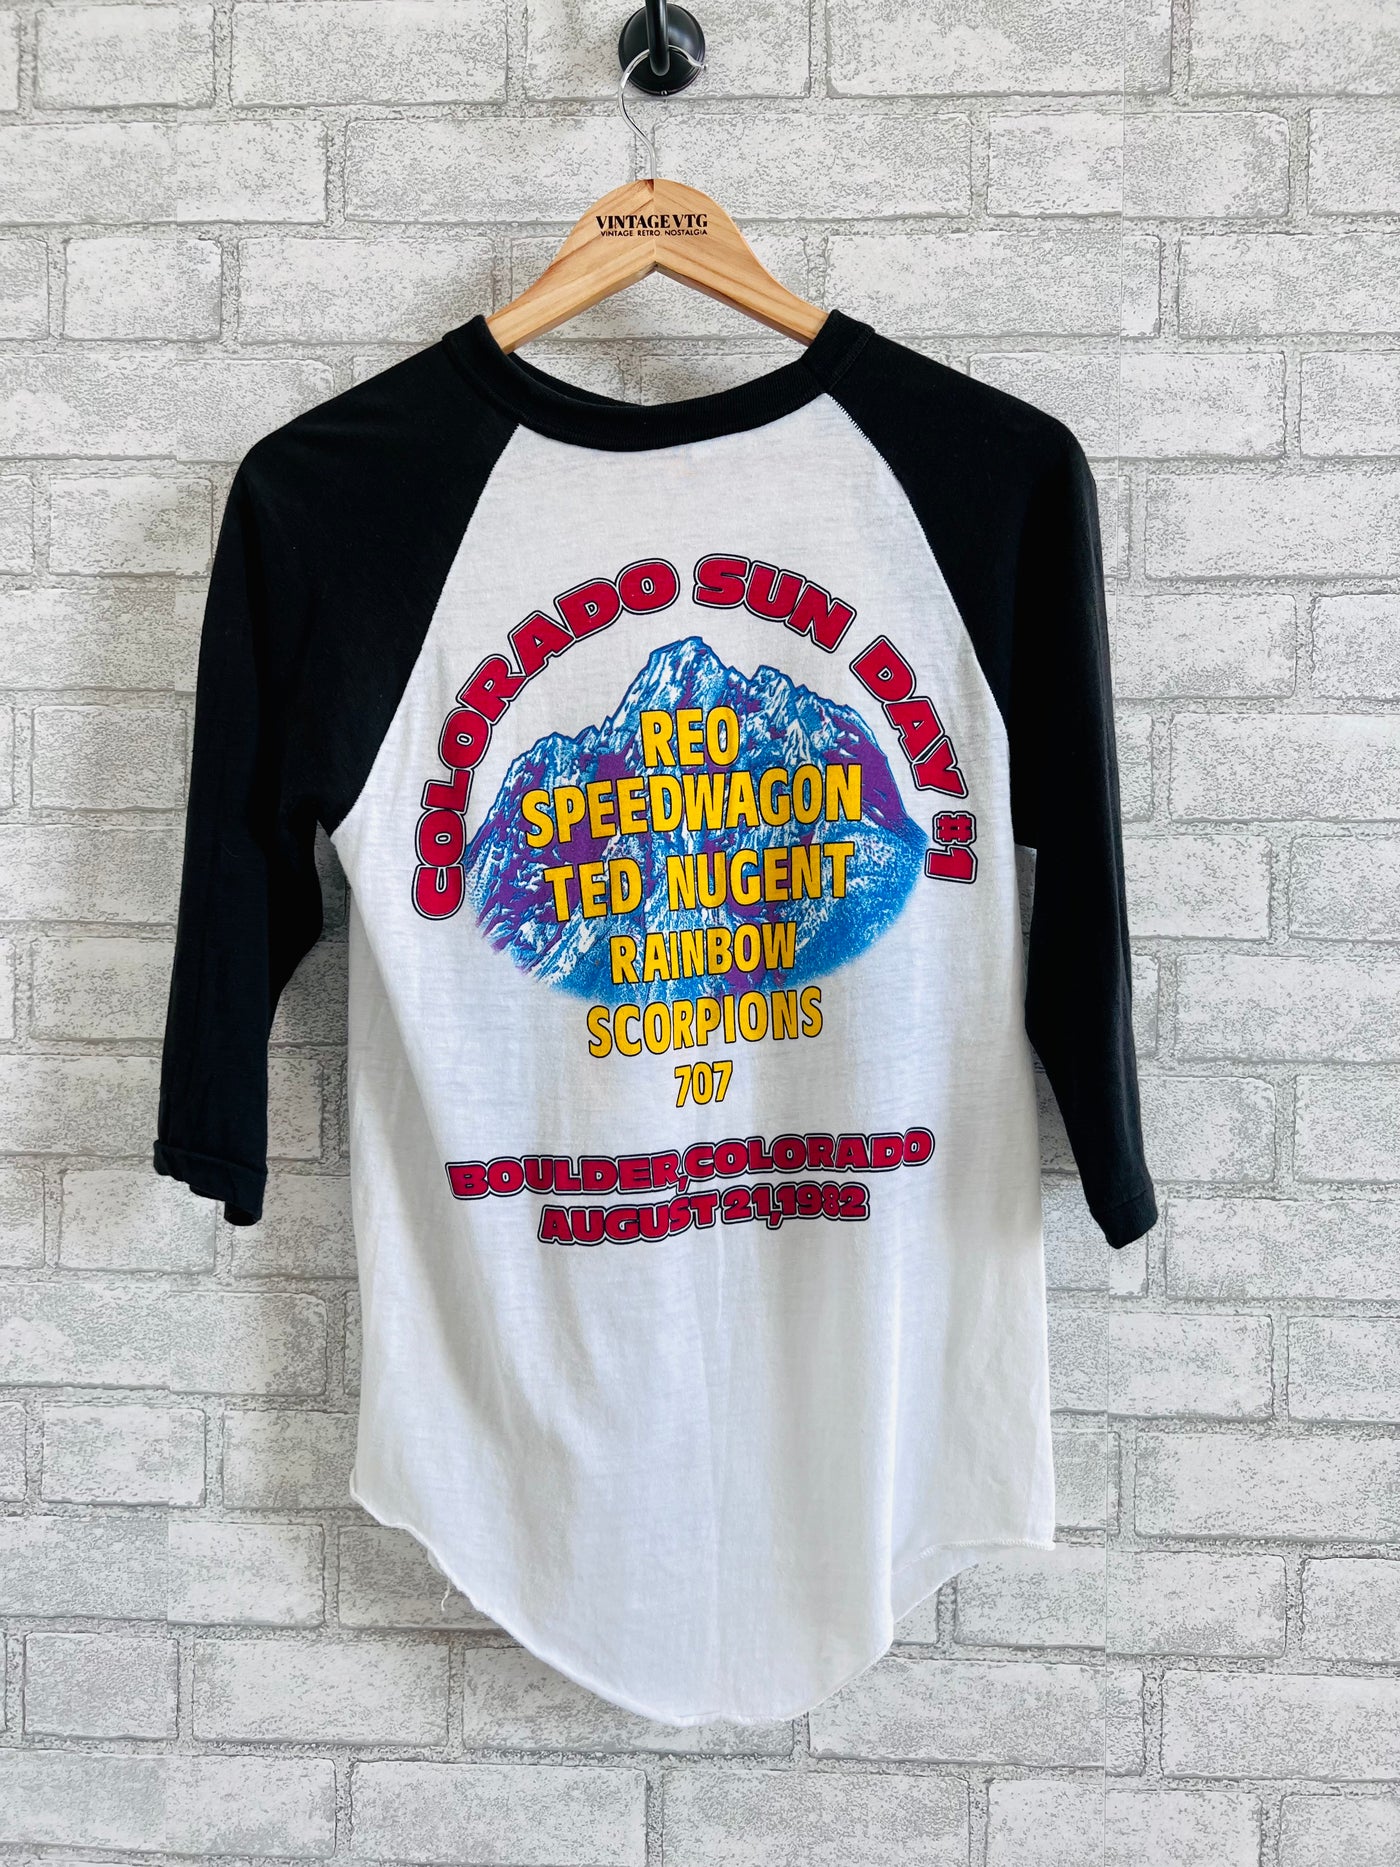 Vintage 1982 REO Speedwagon, Ted Nugent, Rainbow, Scorpion concert T-shirt back view of shirt